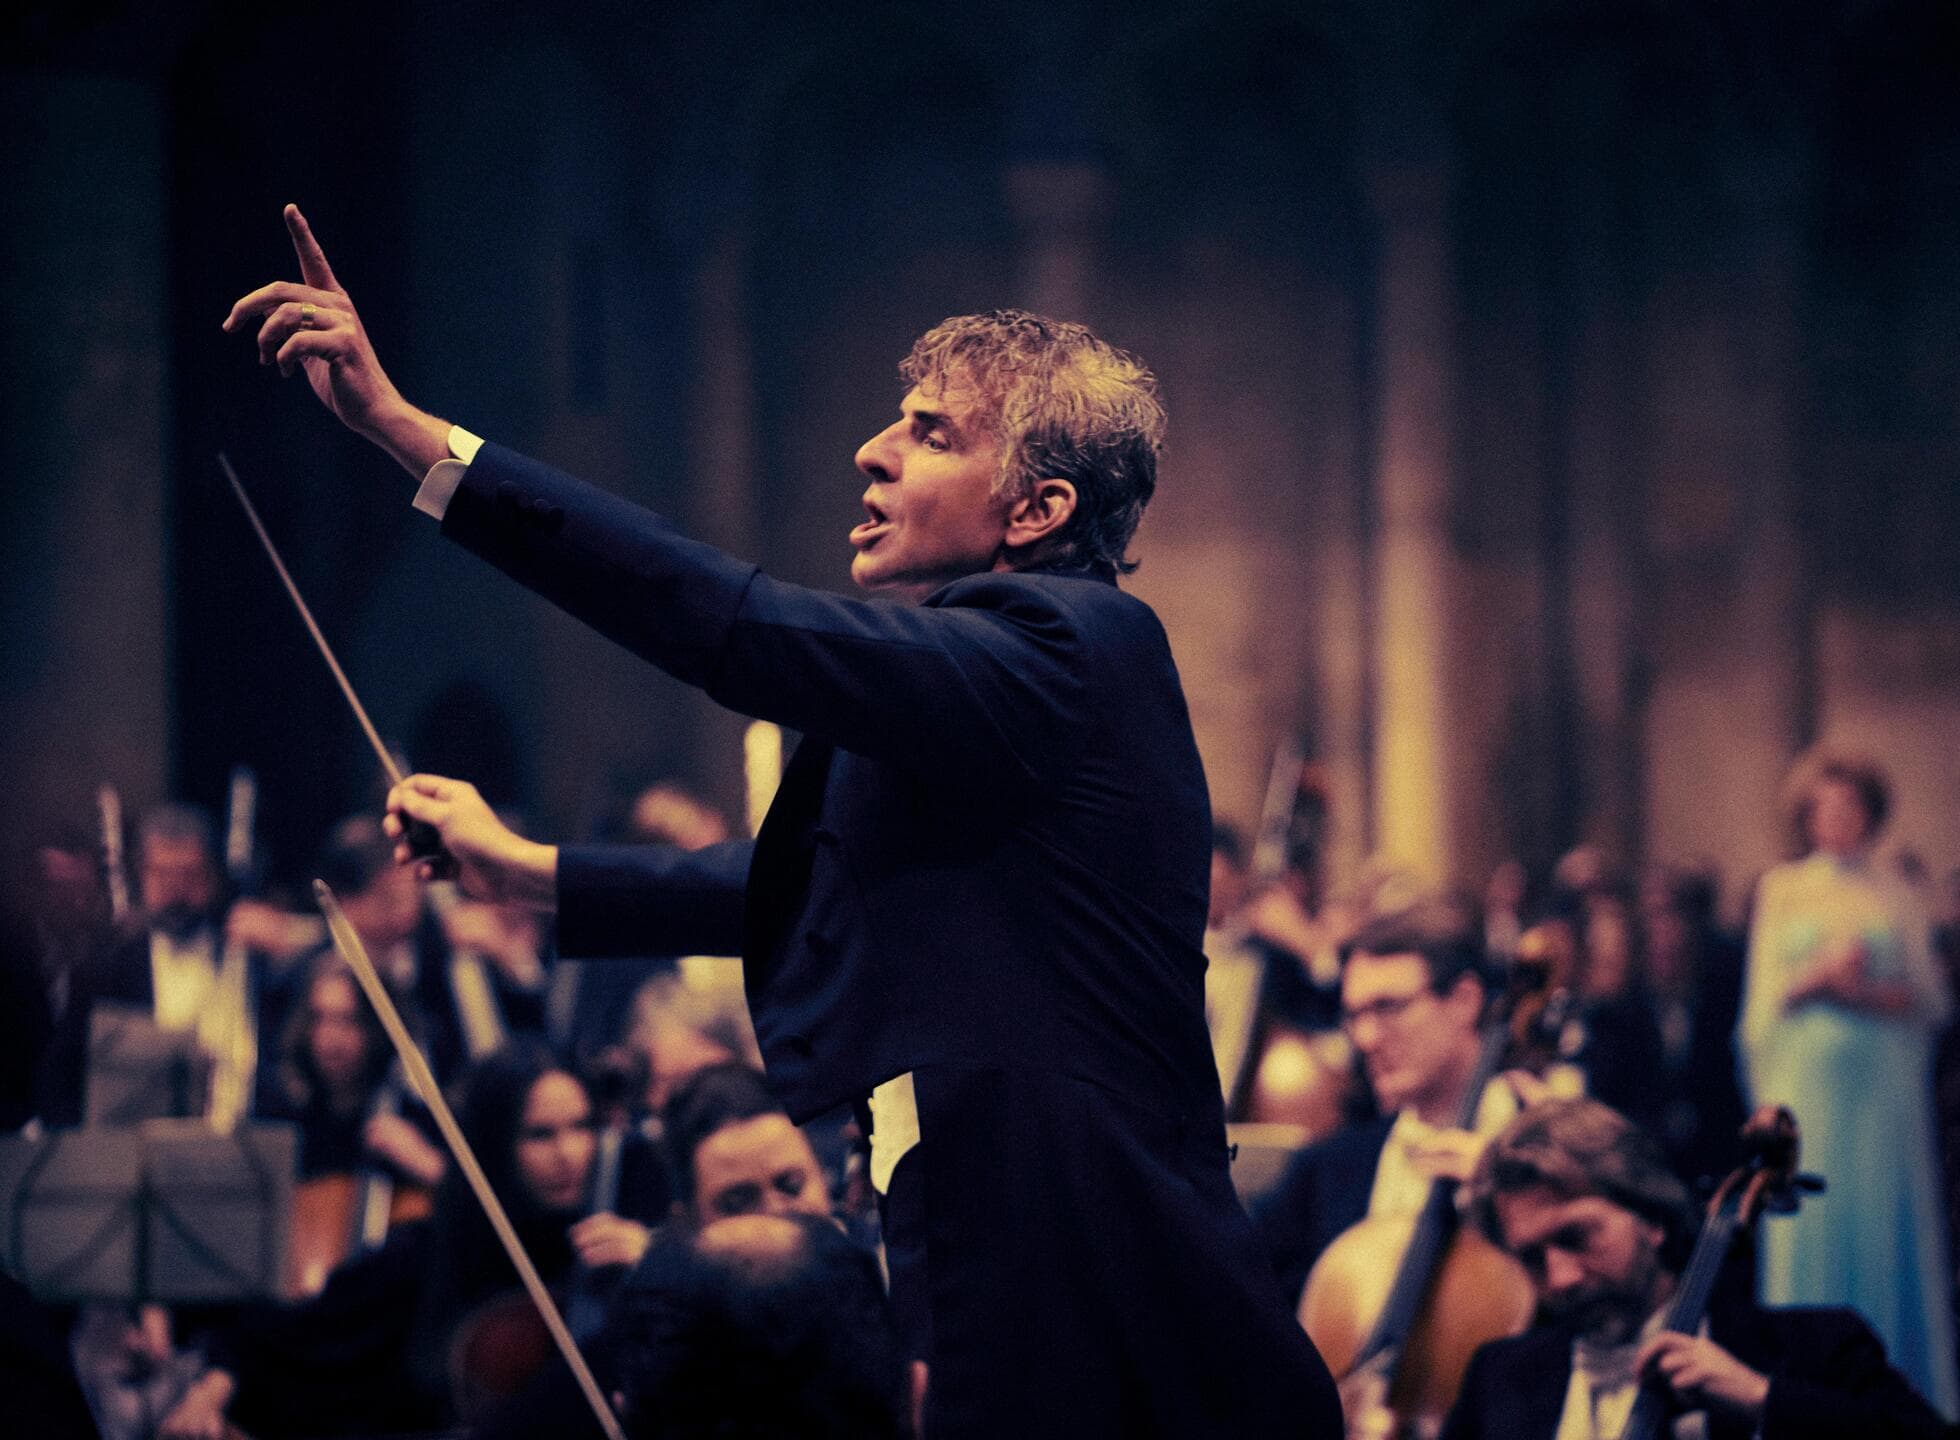 A man passionately conducting an orchestra in this image from Sikelia Productions.